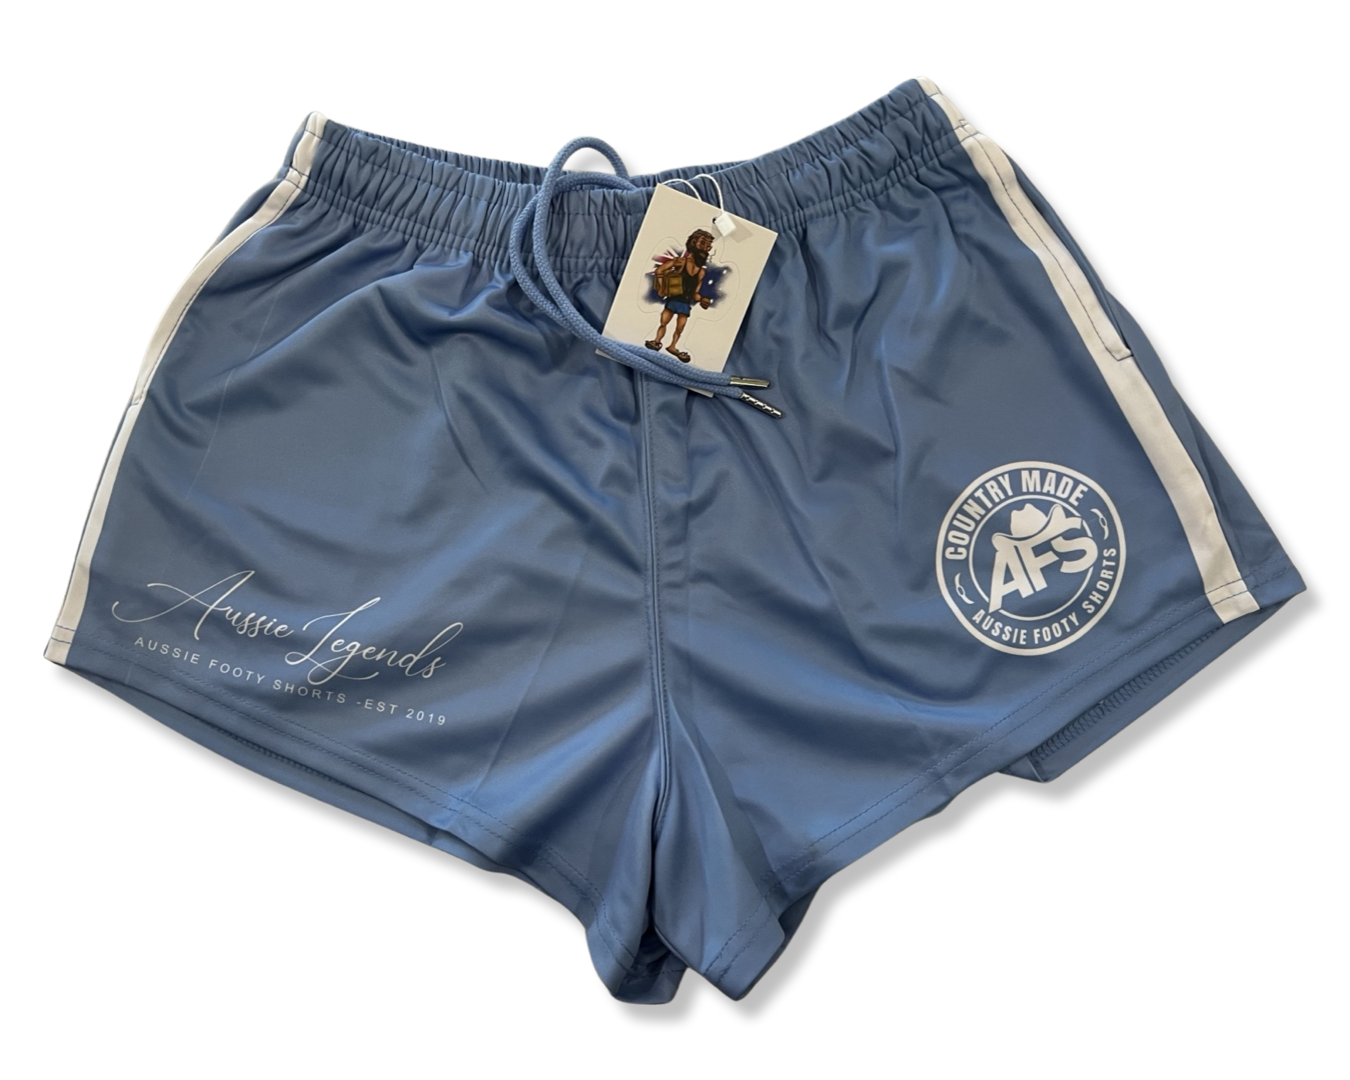 Country Made- Light Blue and White Footy Shorts (With Pockets)